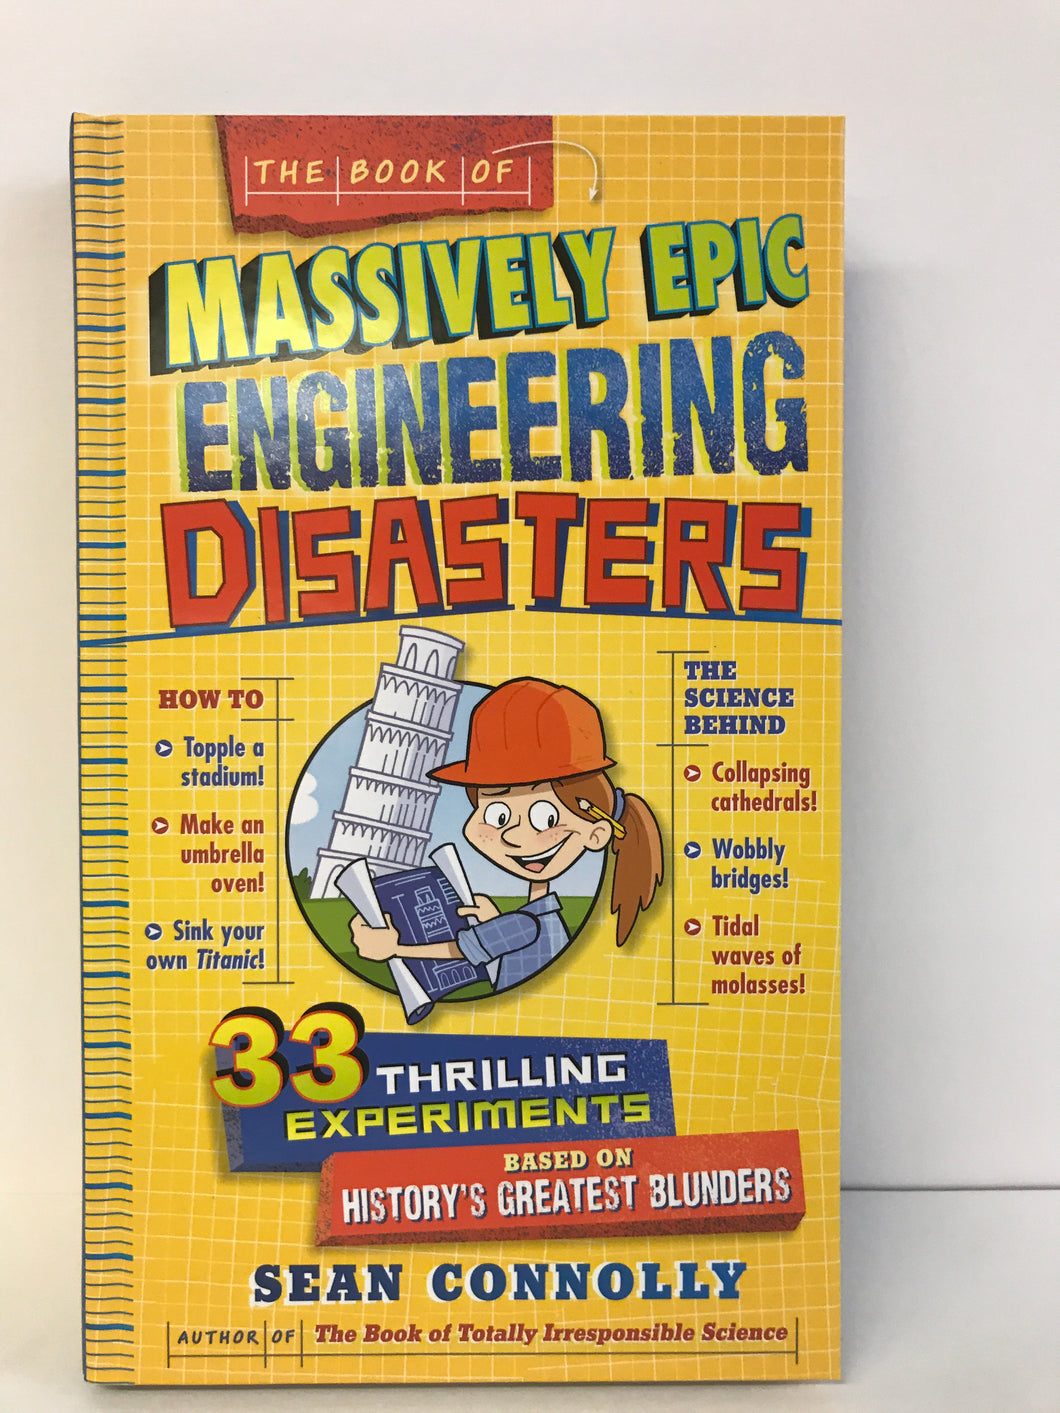 The Book of Massively Epic Engineering Disasters- 33 experiments